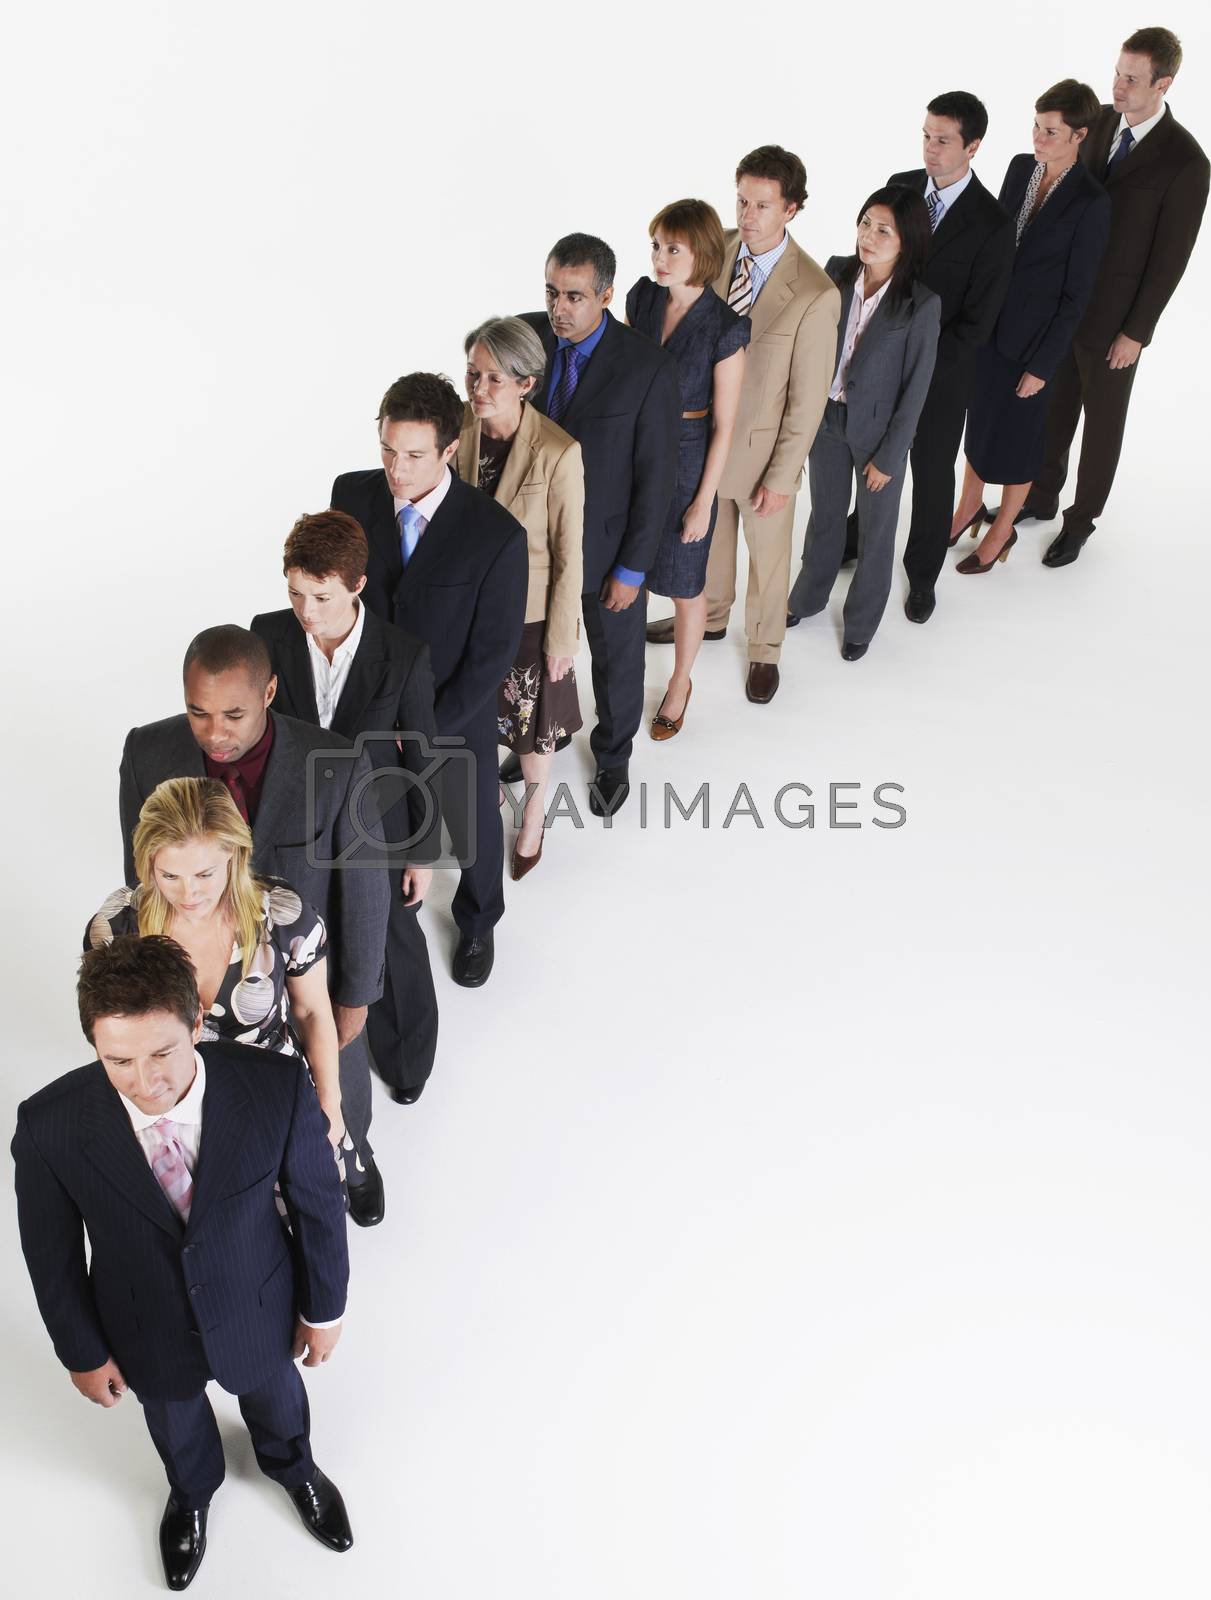 Royalty free image of Line of Businesspeople by moodboard